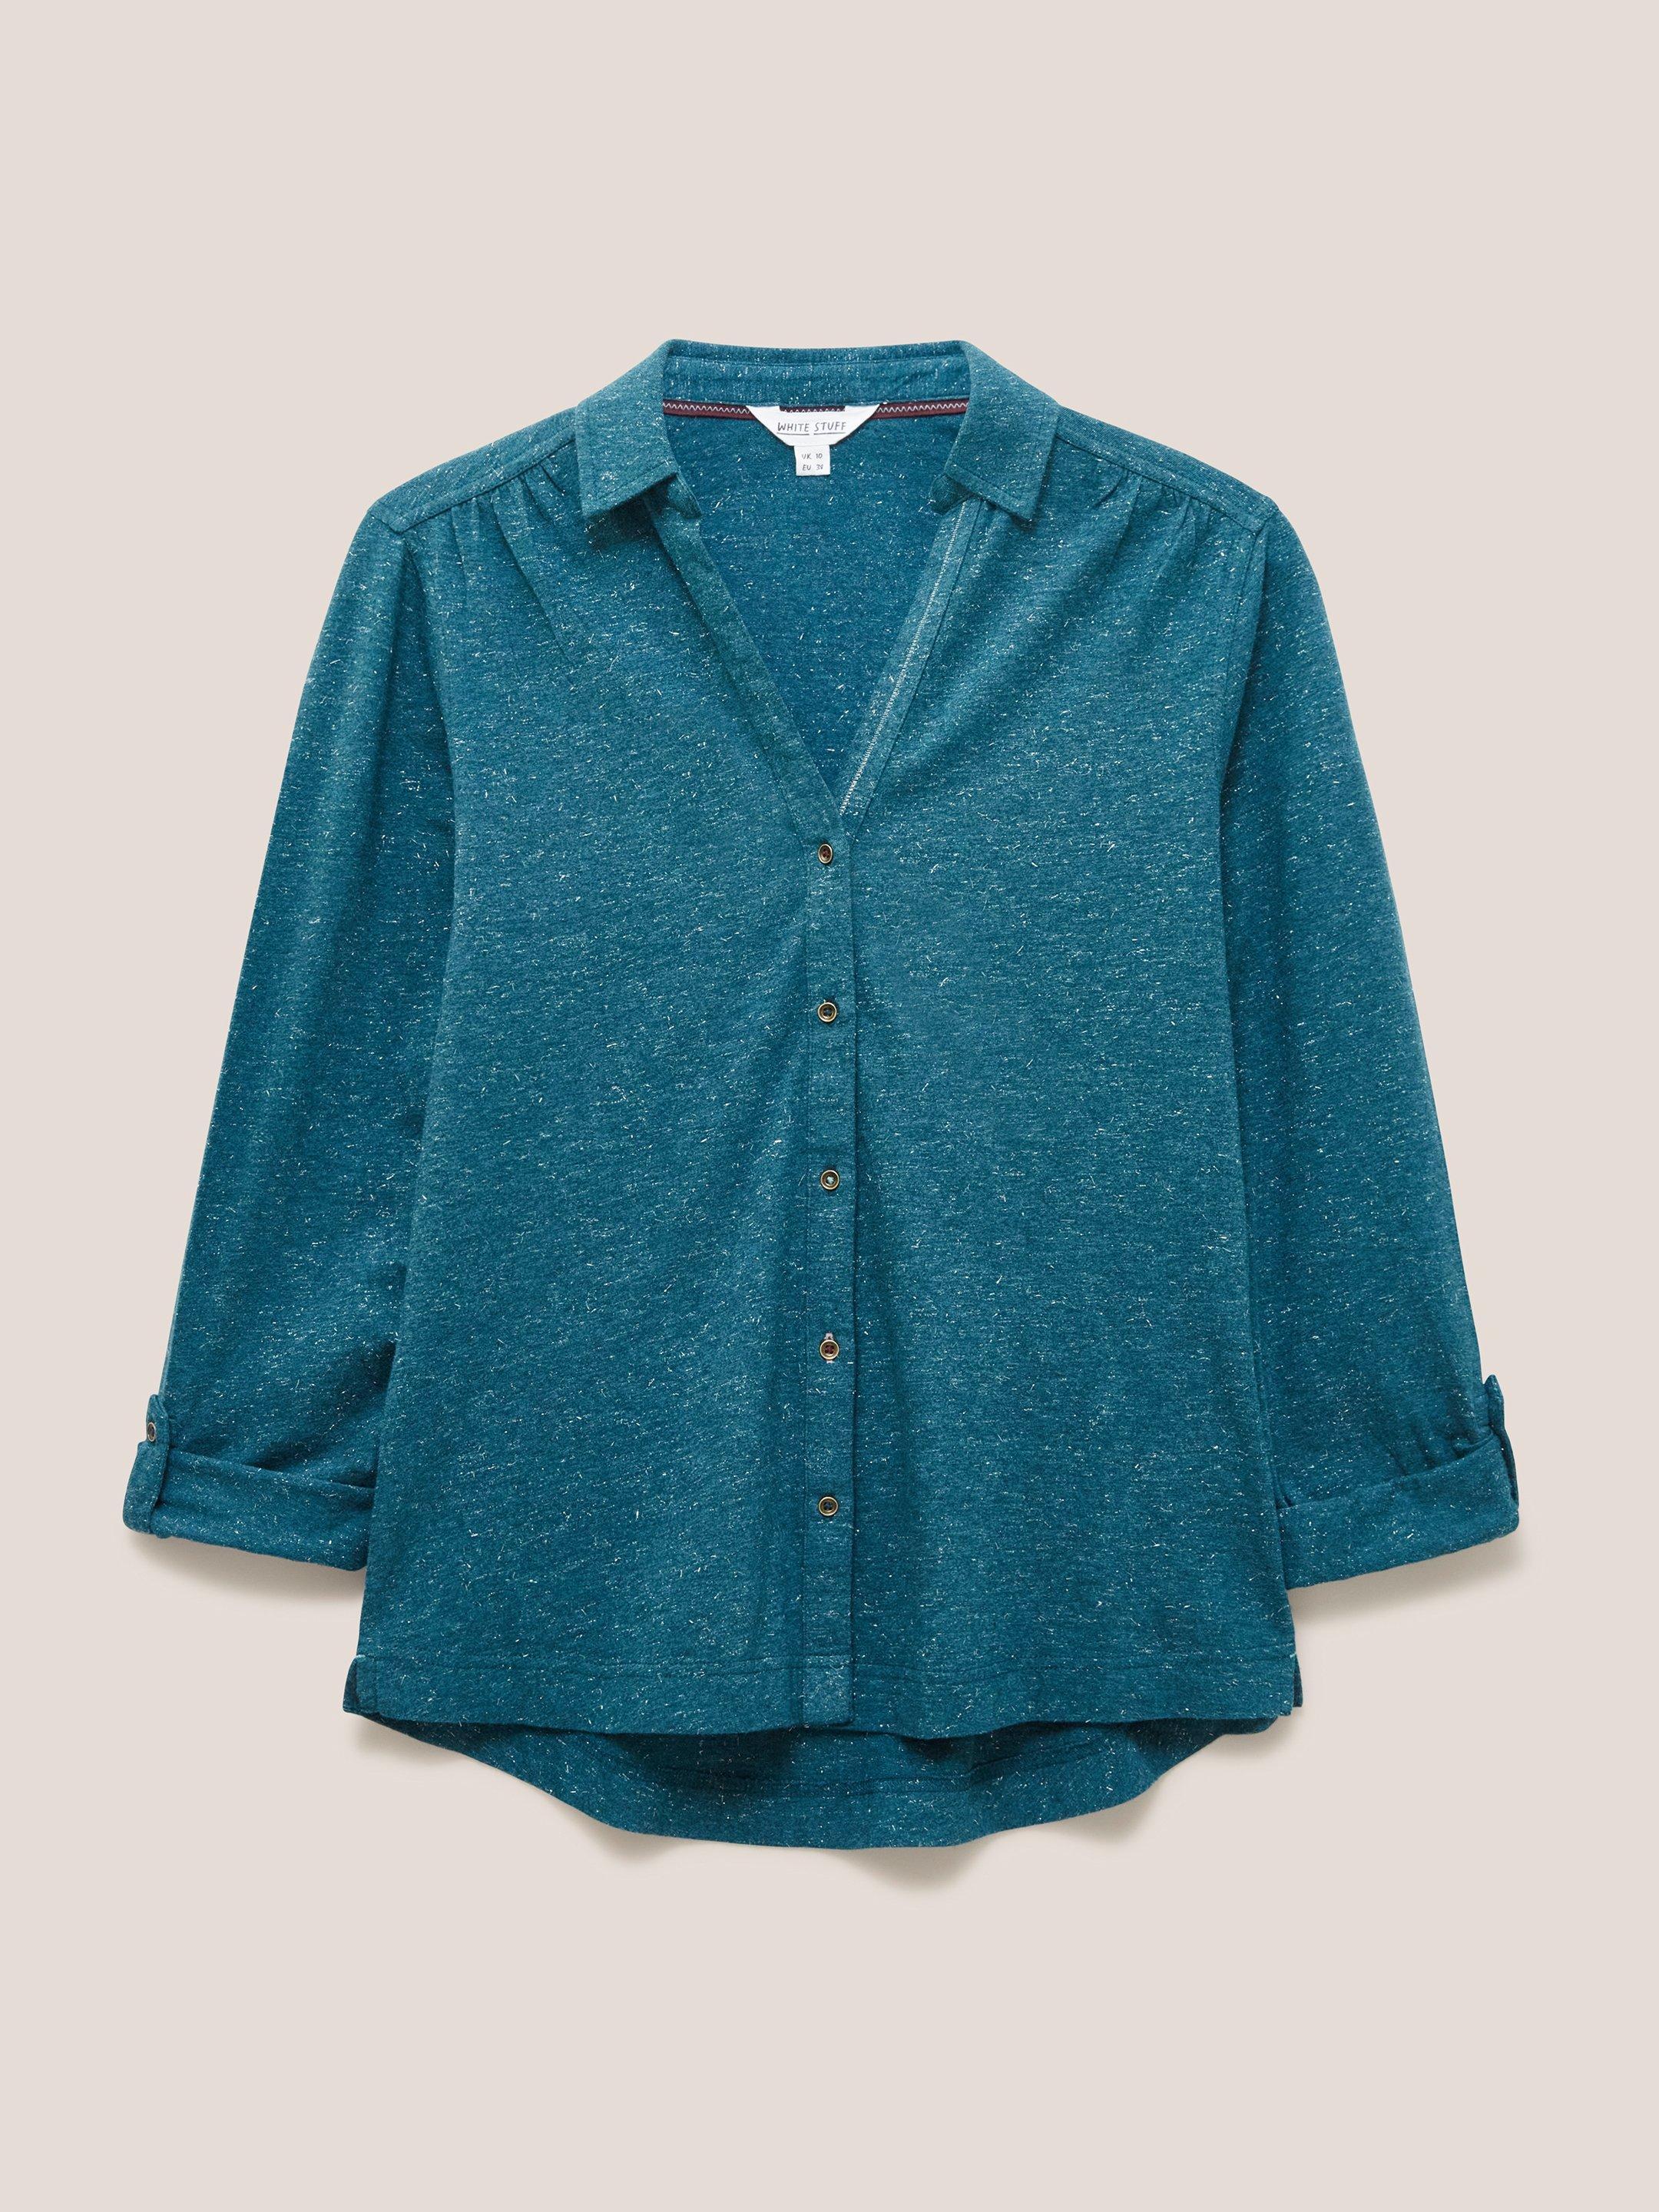 ANNIE SPARKLE SLIM FIT SHIRT in DK TEAL - FLAT FRONT